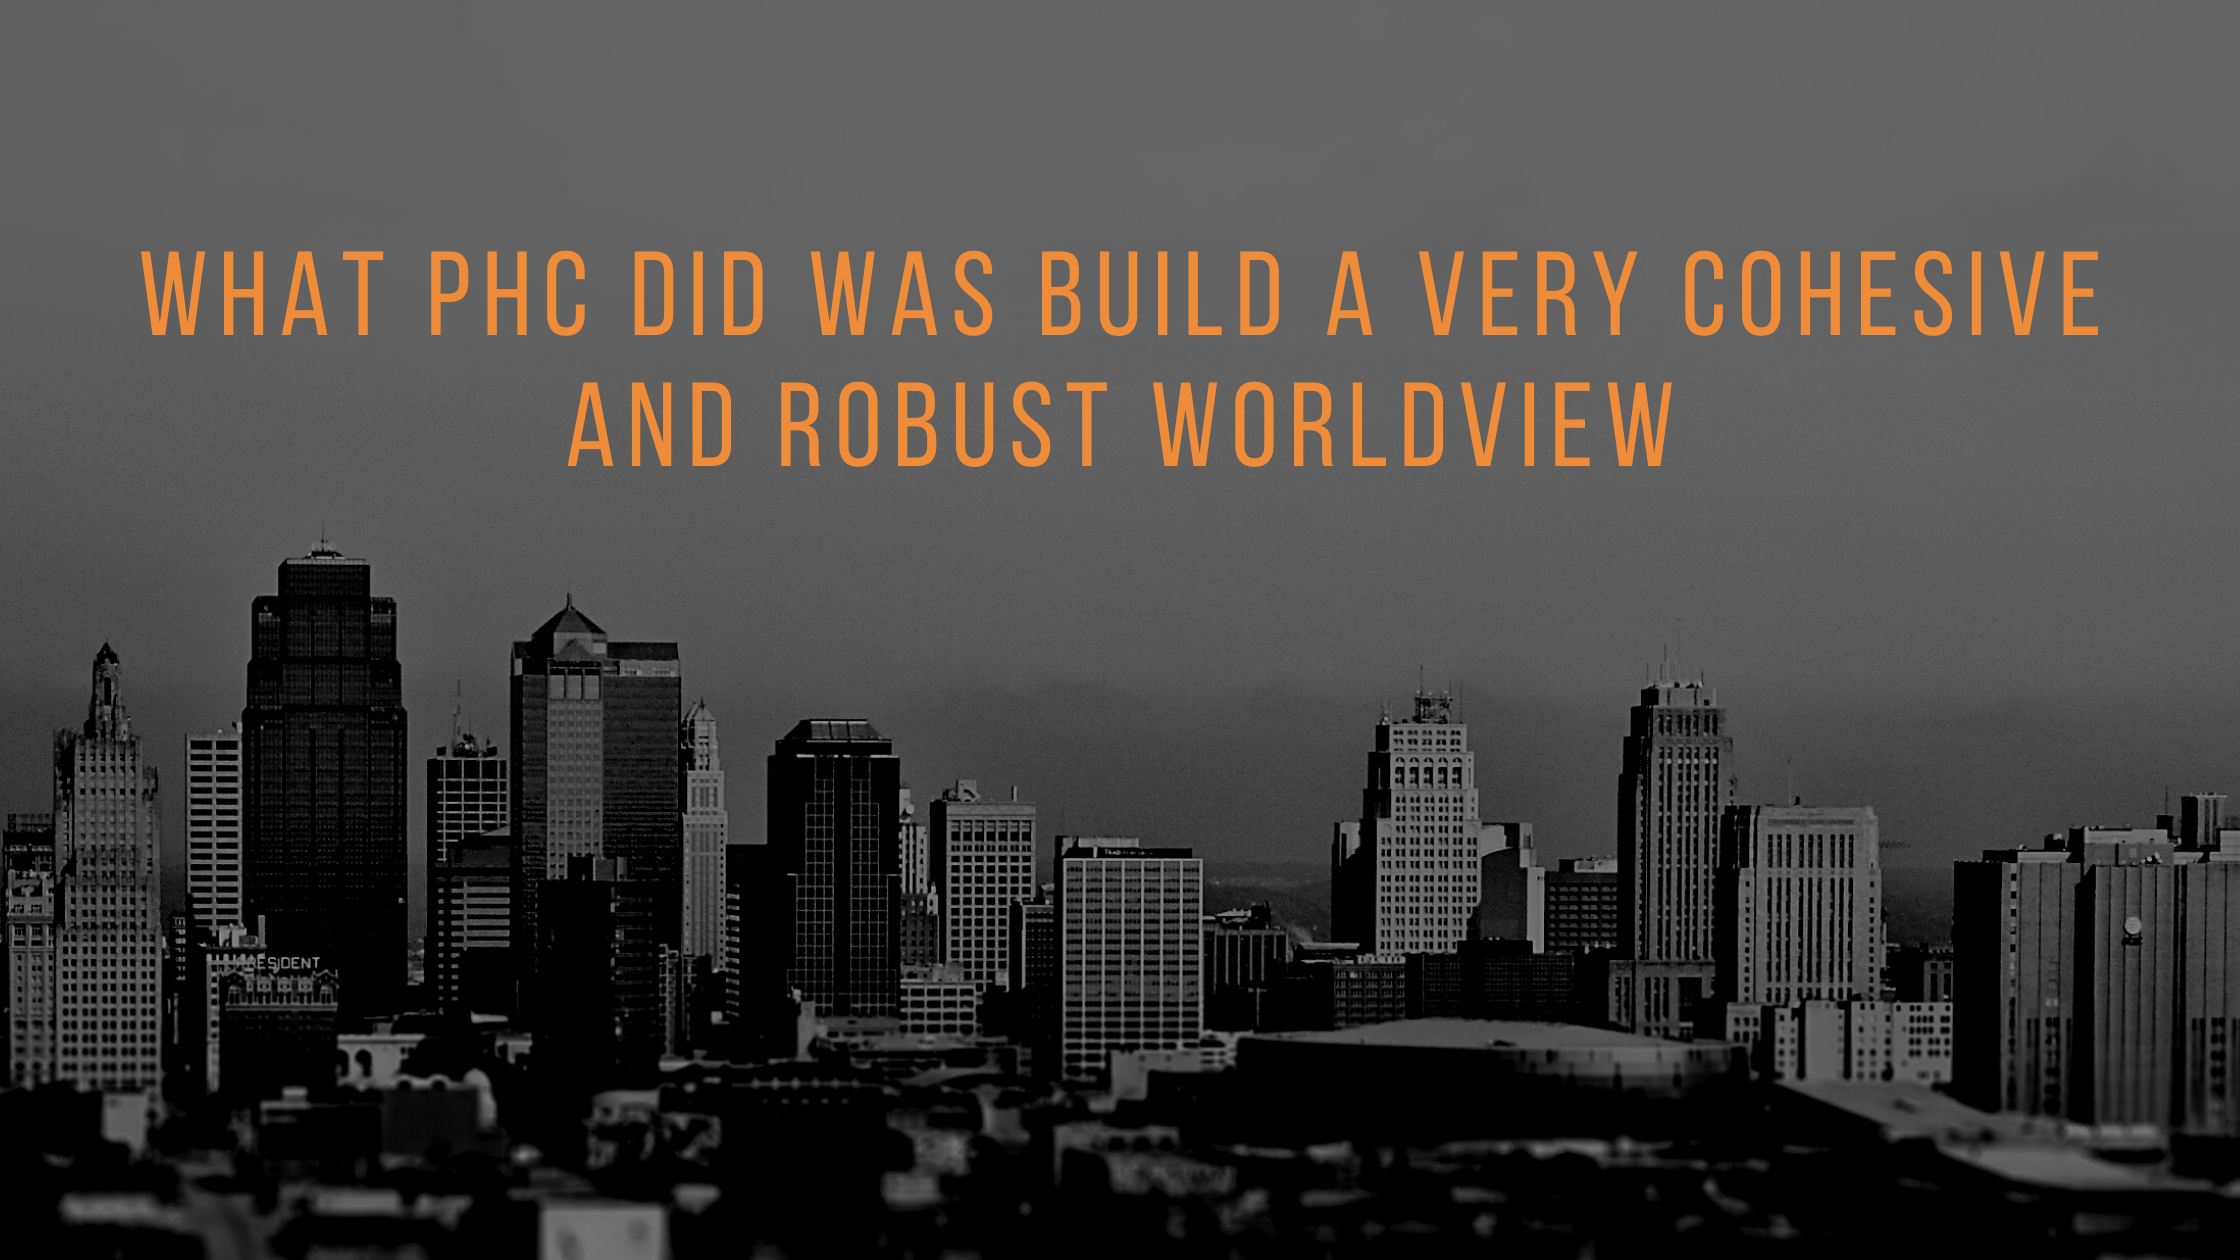 What PHC did was build a very cohesive and robust worldview